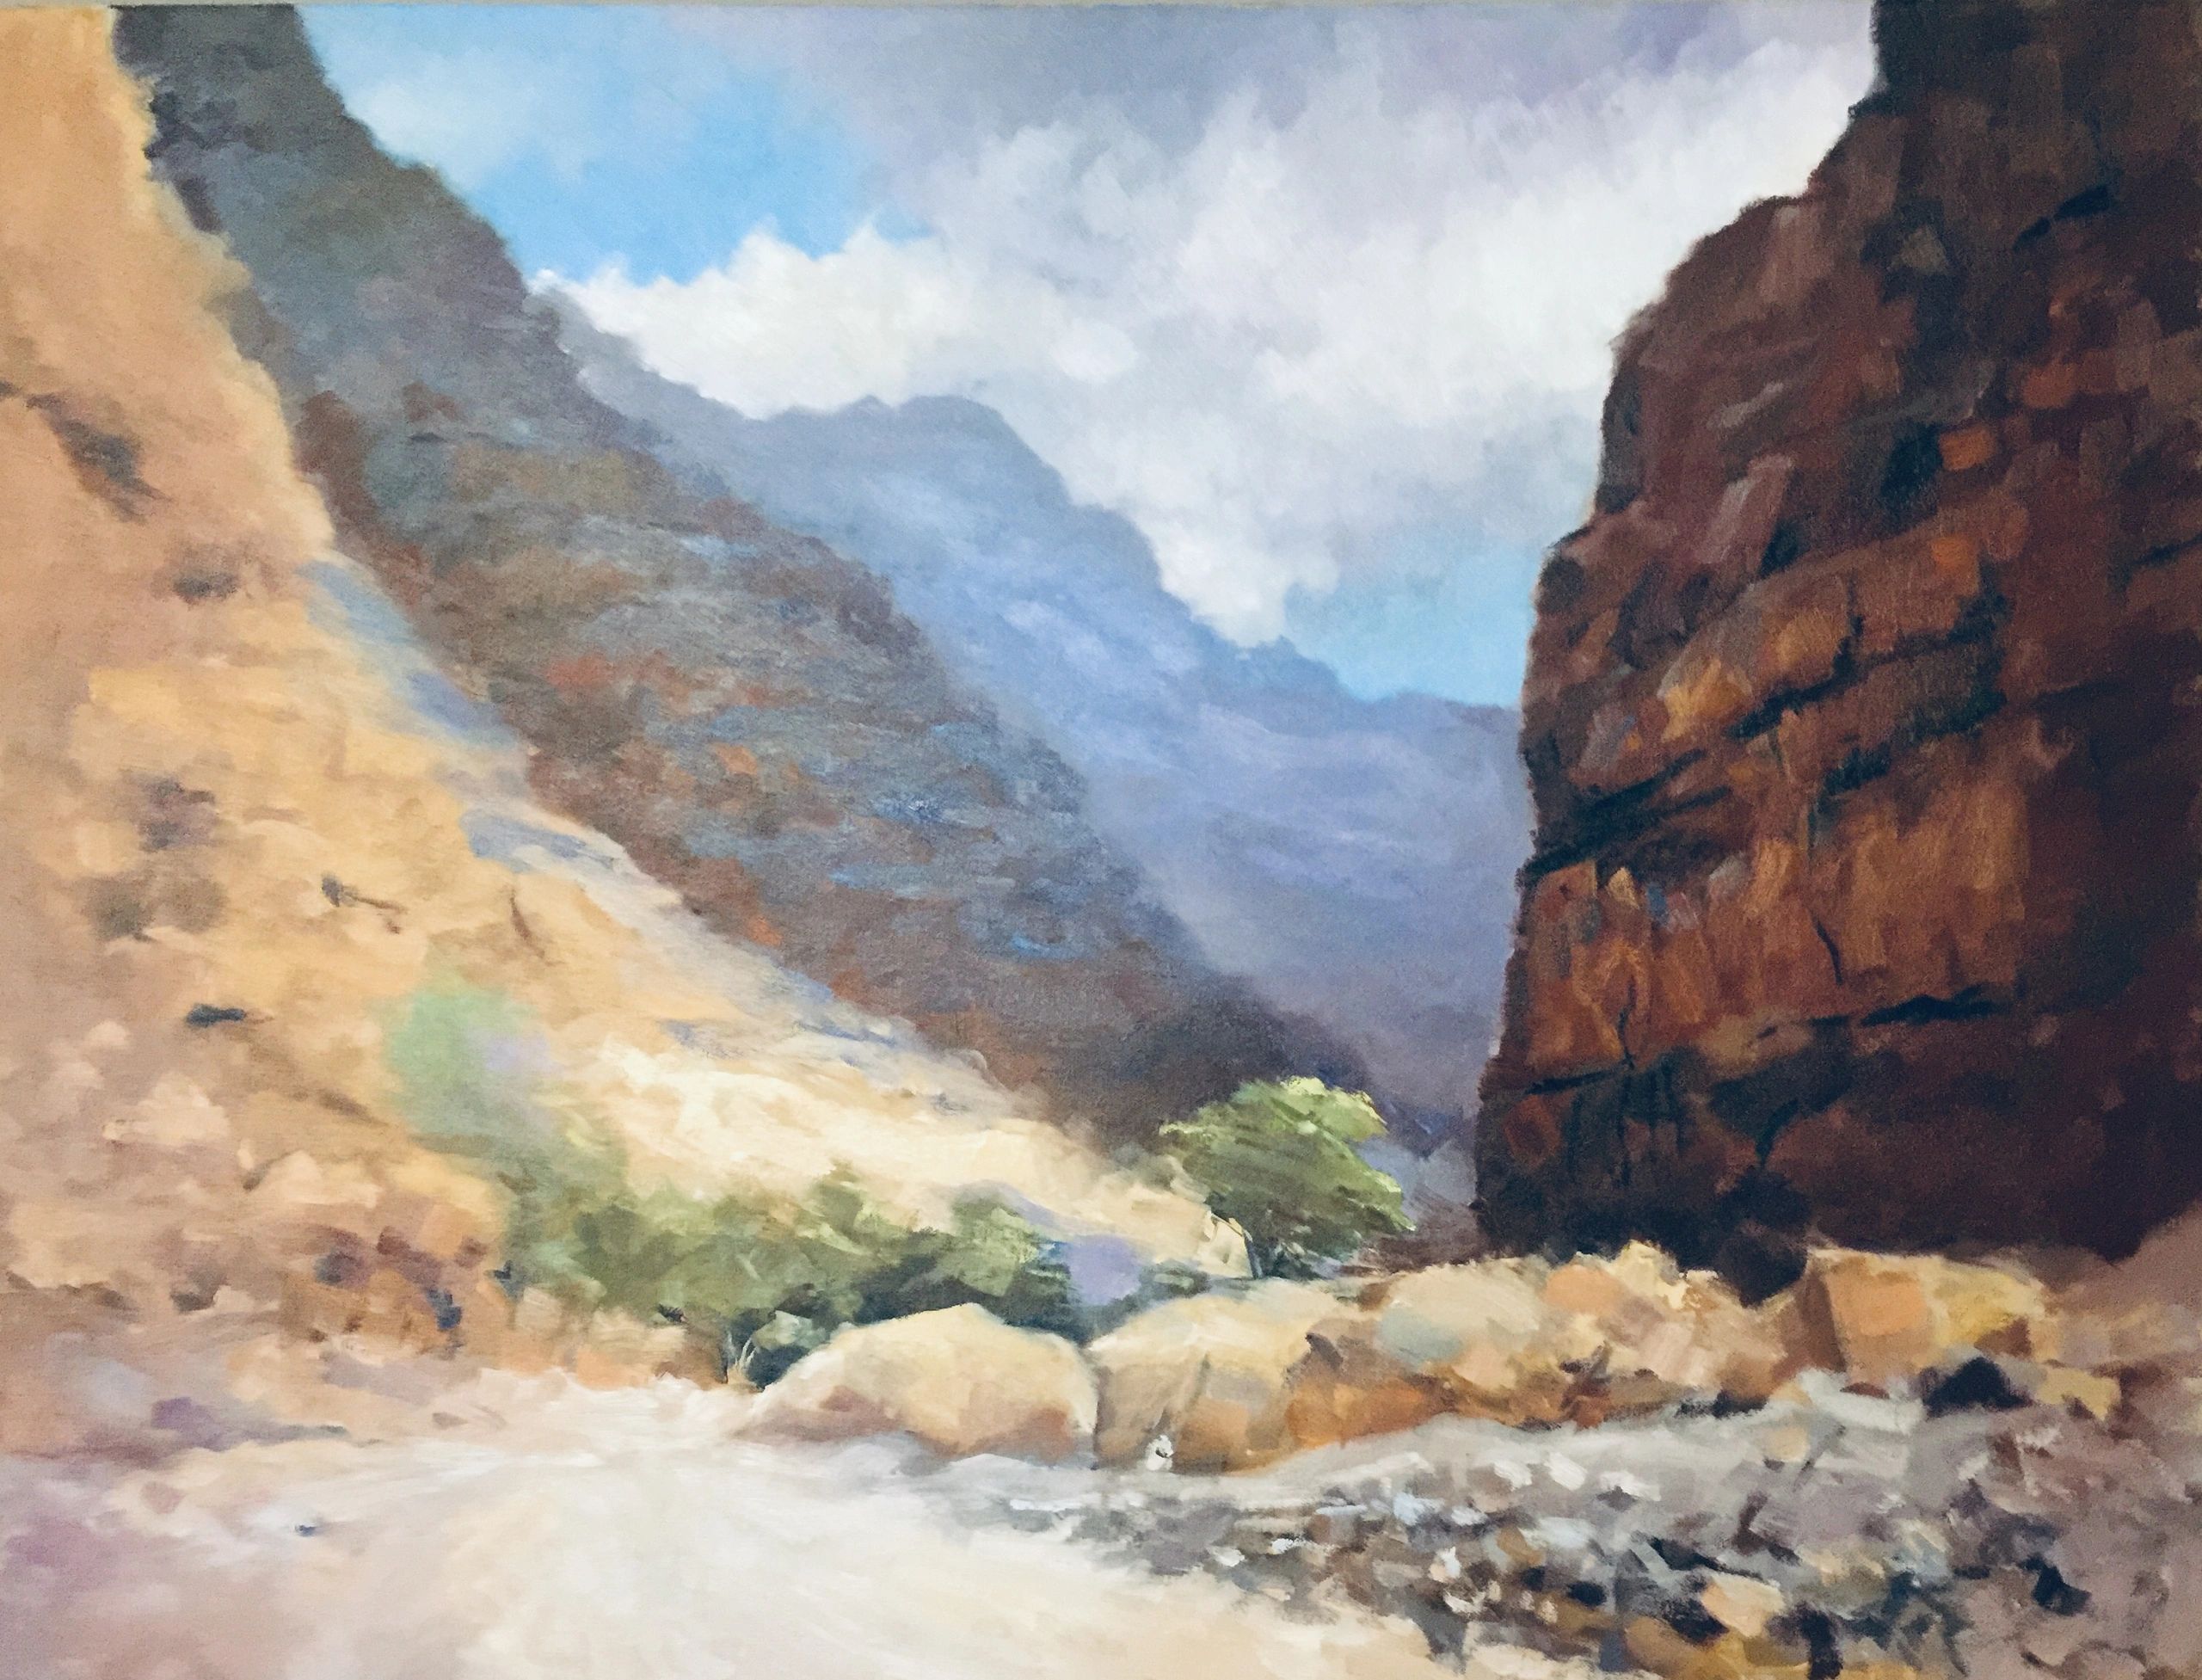 Oil on canvas 18 x 24 inches. 
One of the views from Wadi Naqab, a great spot in the UAE for plein a